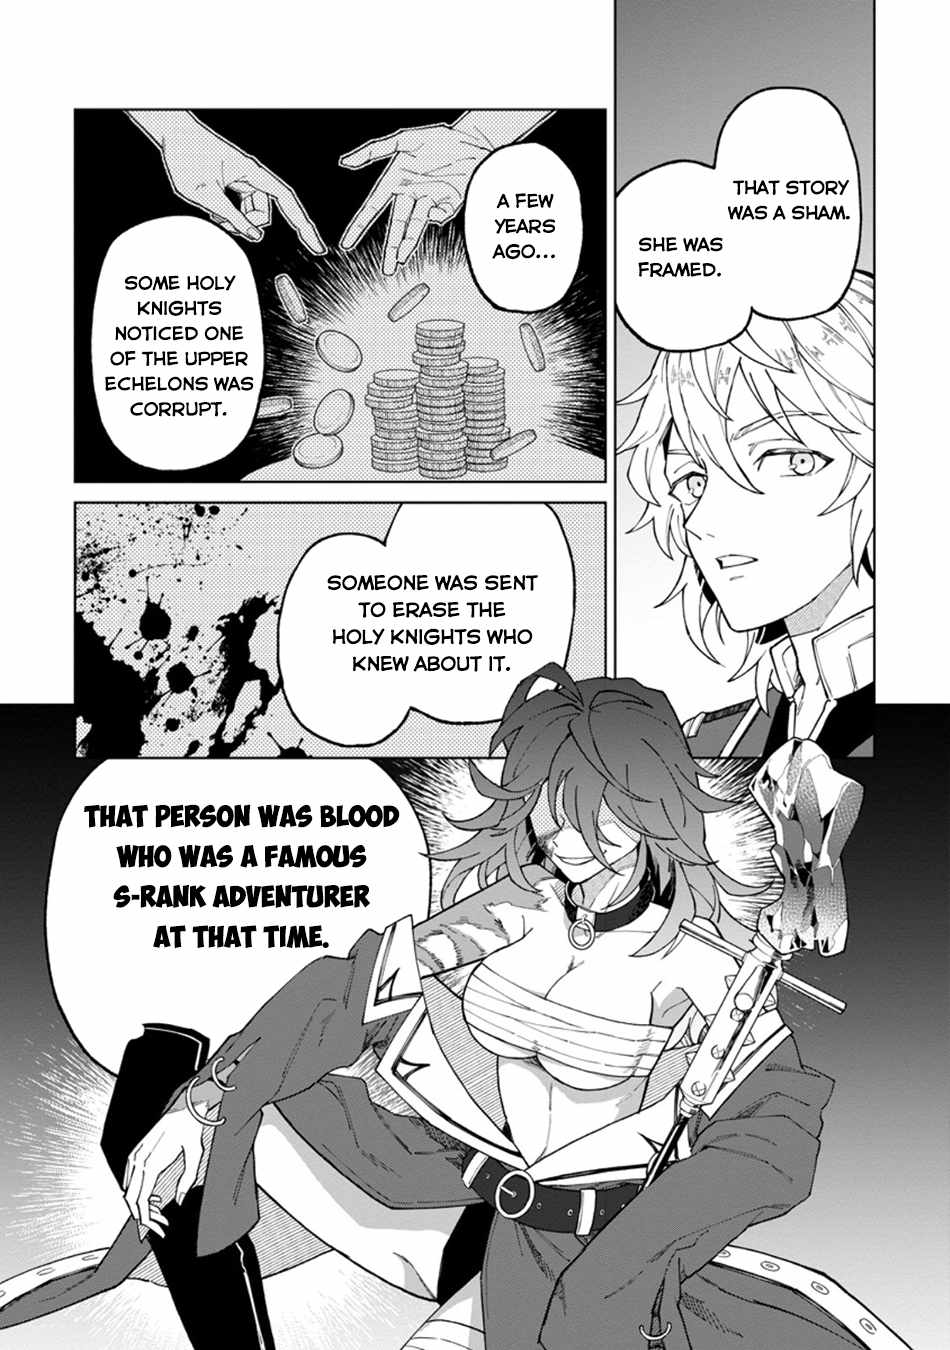 The White Mage Who Was Banished From The Hero's Party Is Picked Up By An S Rank Adventurer~ This White Mage Is Too Out Of The Ordinary! - 29 page 6-8927bdd1